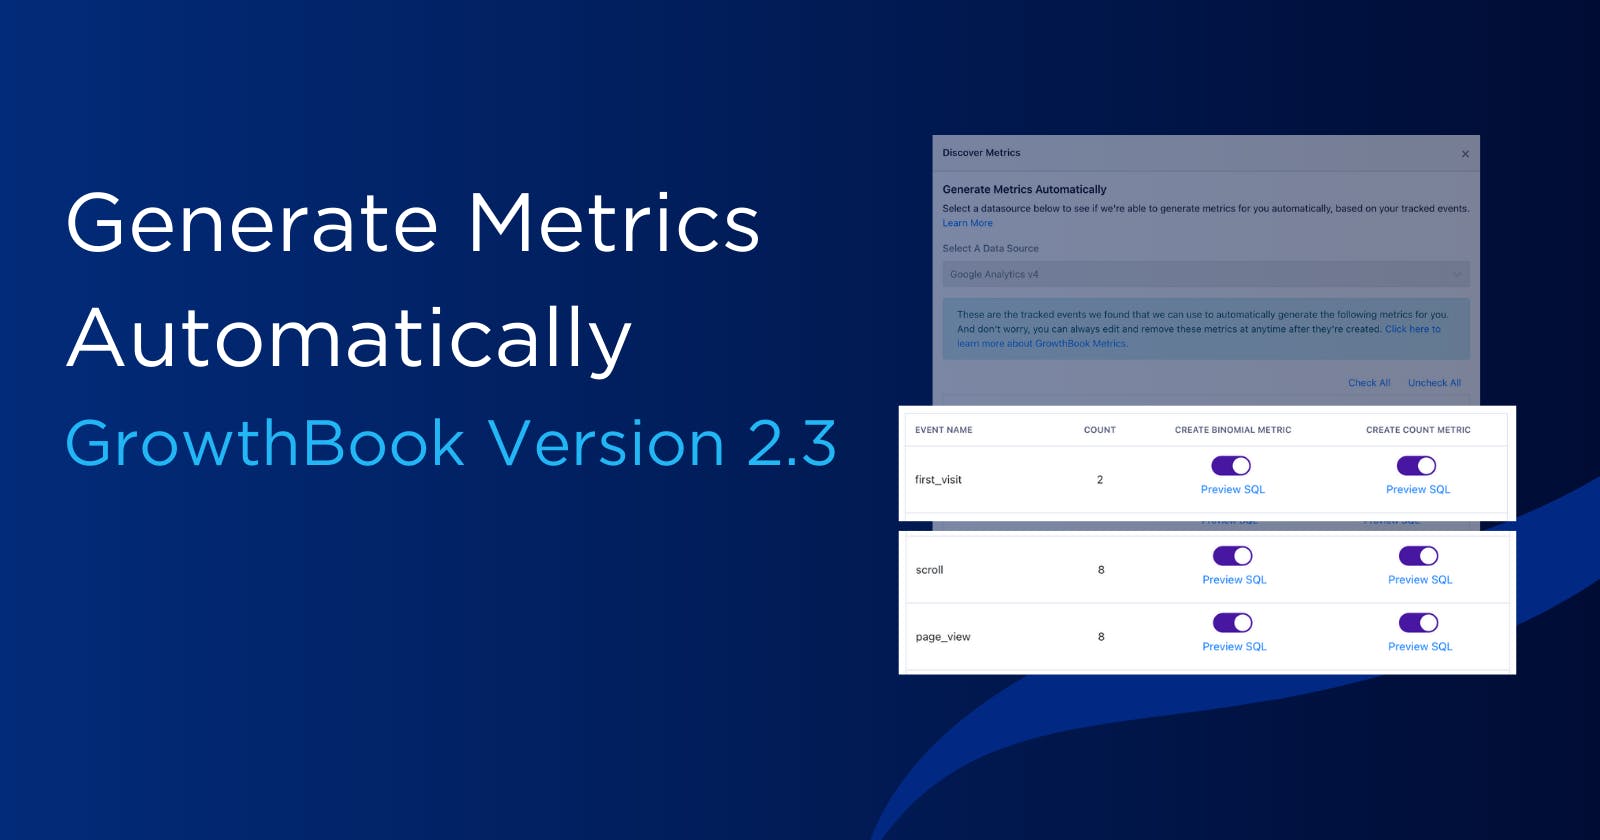 New Feature: Save time with Automatic Metric Generation!